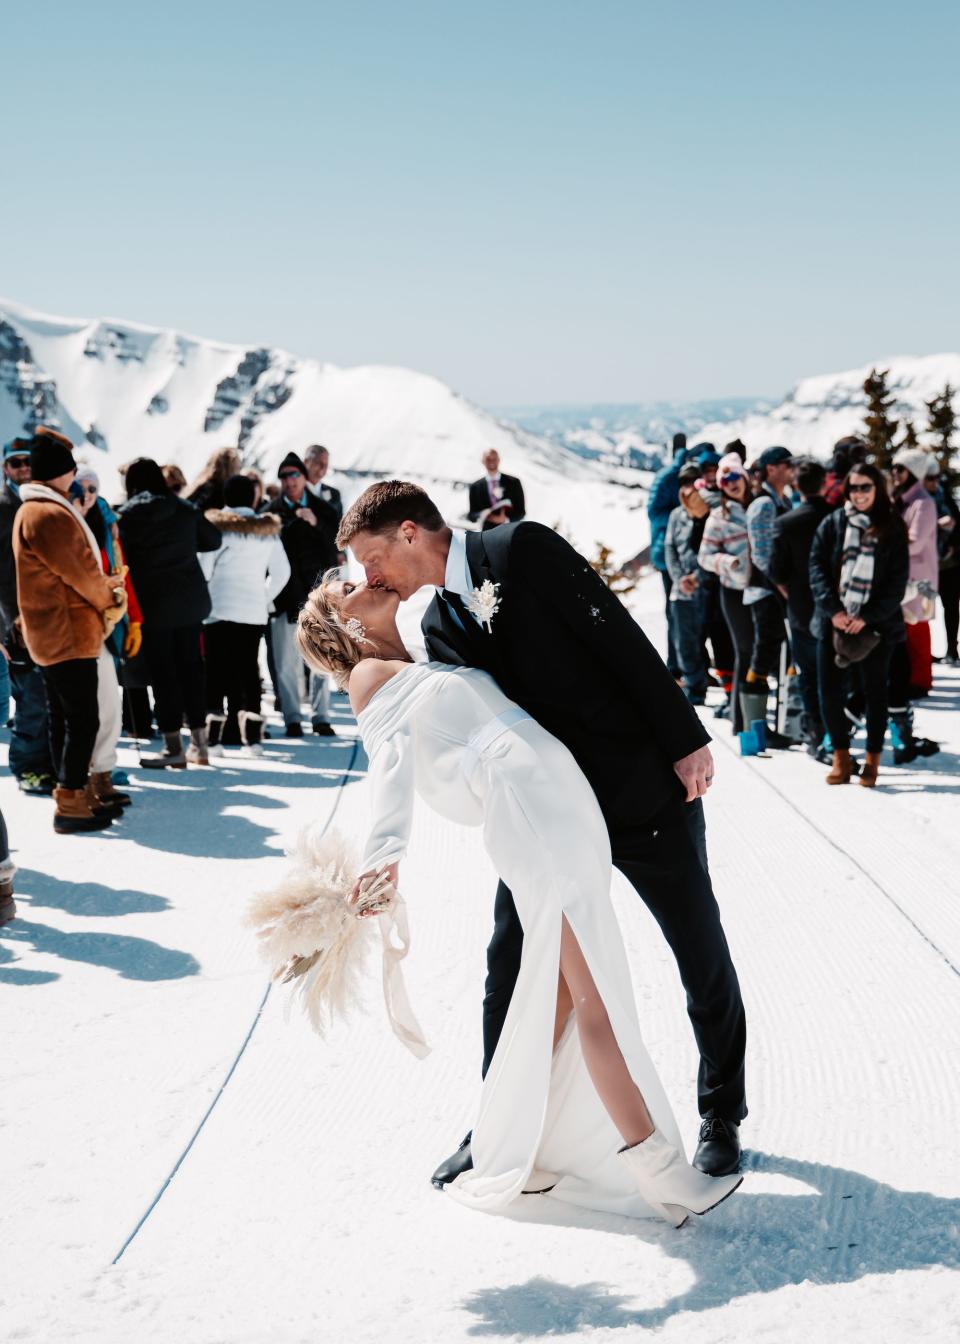 A groom dips and kisses a bride on a snowy mountain.